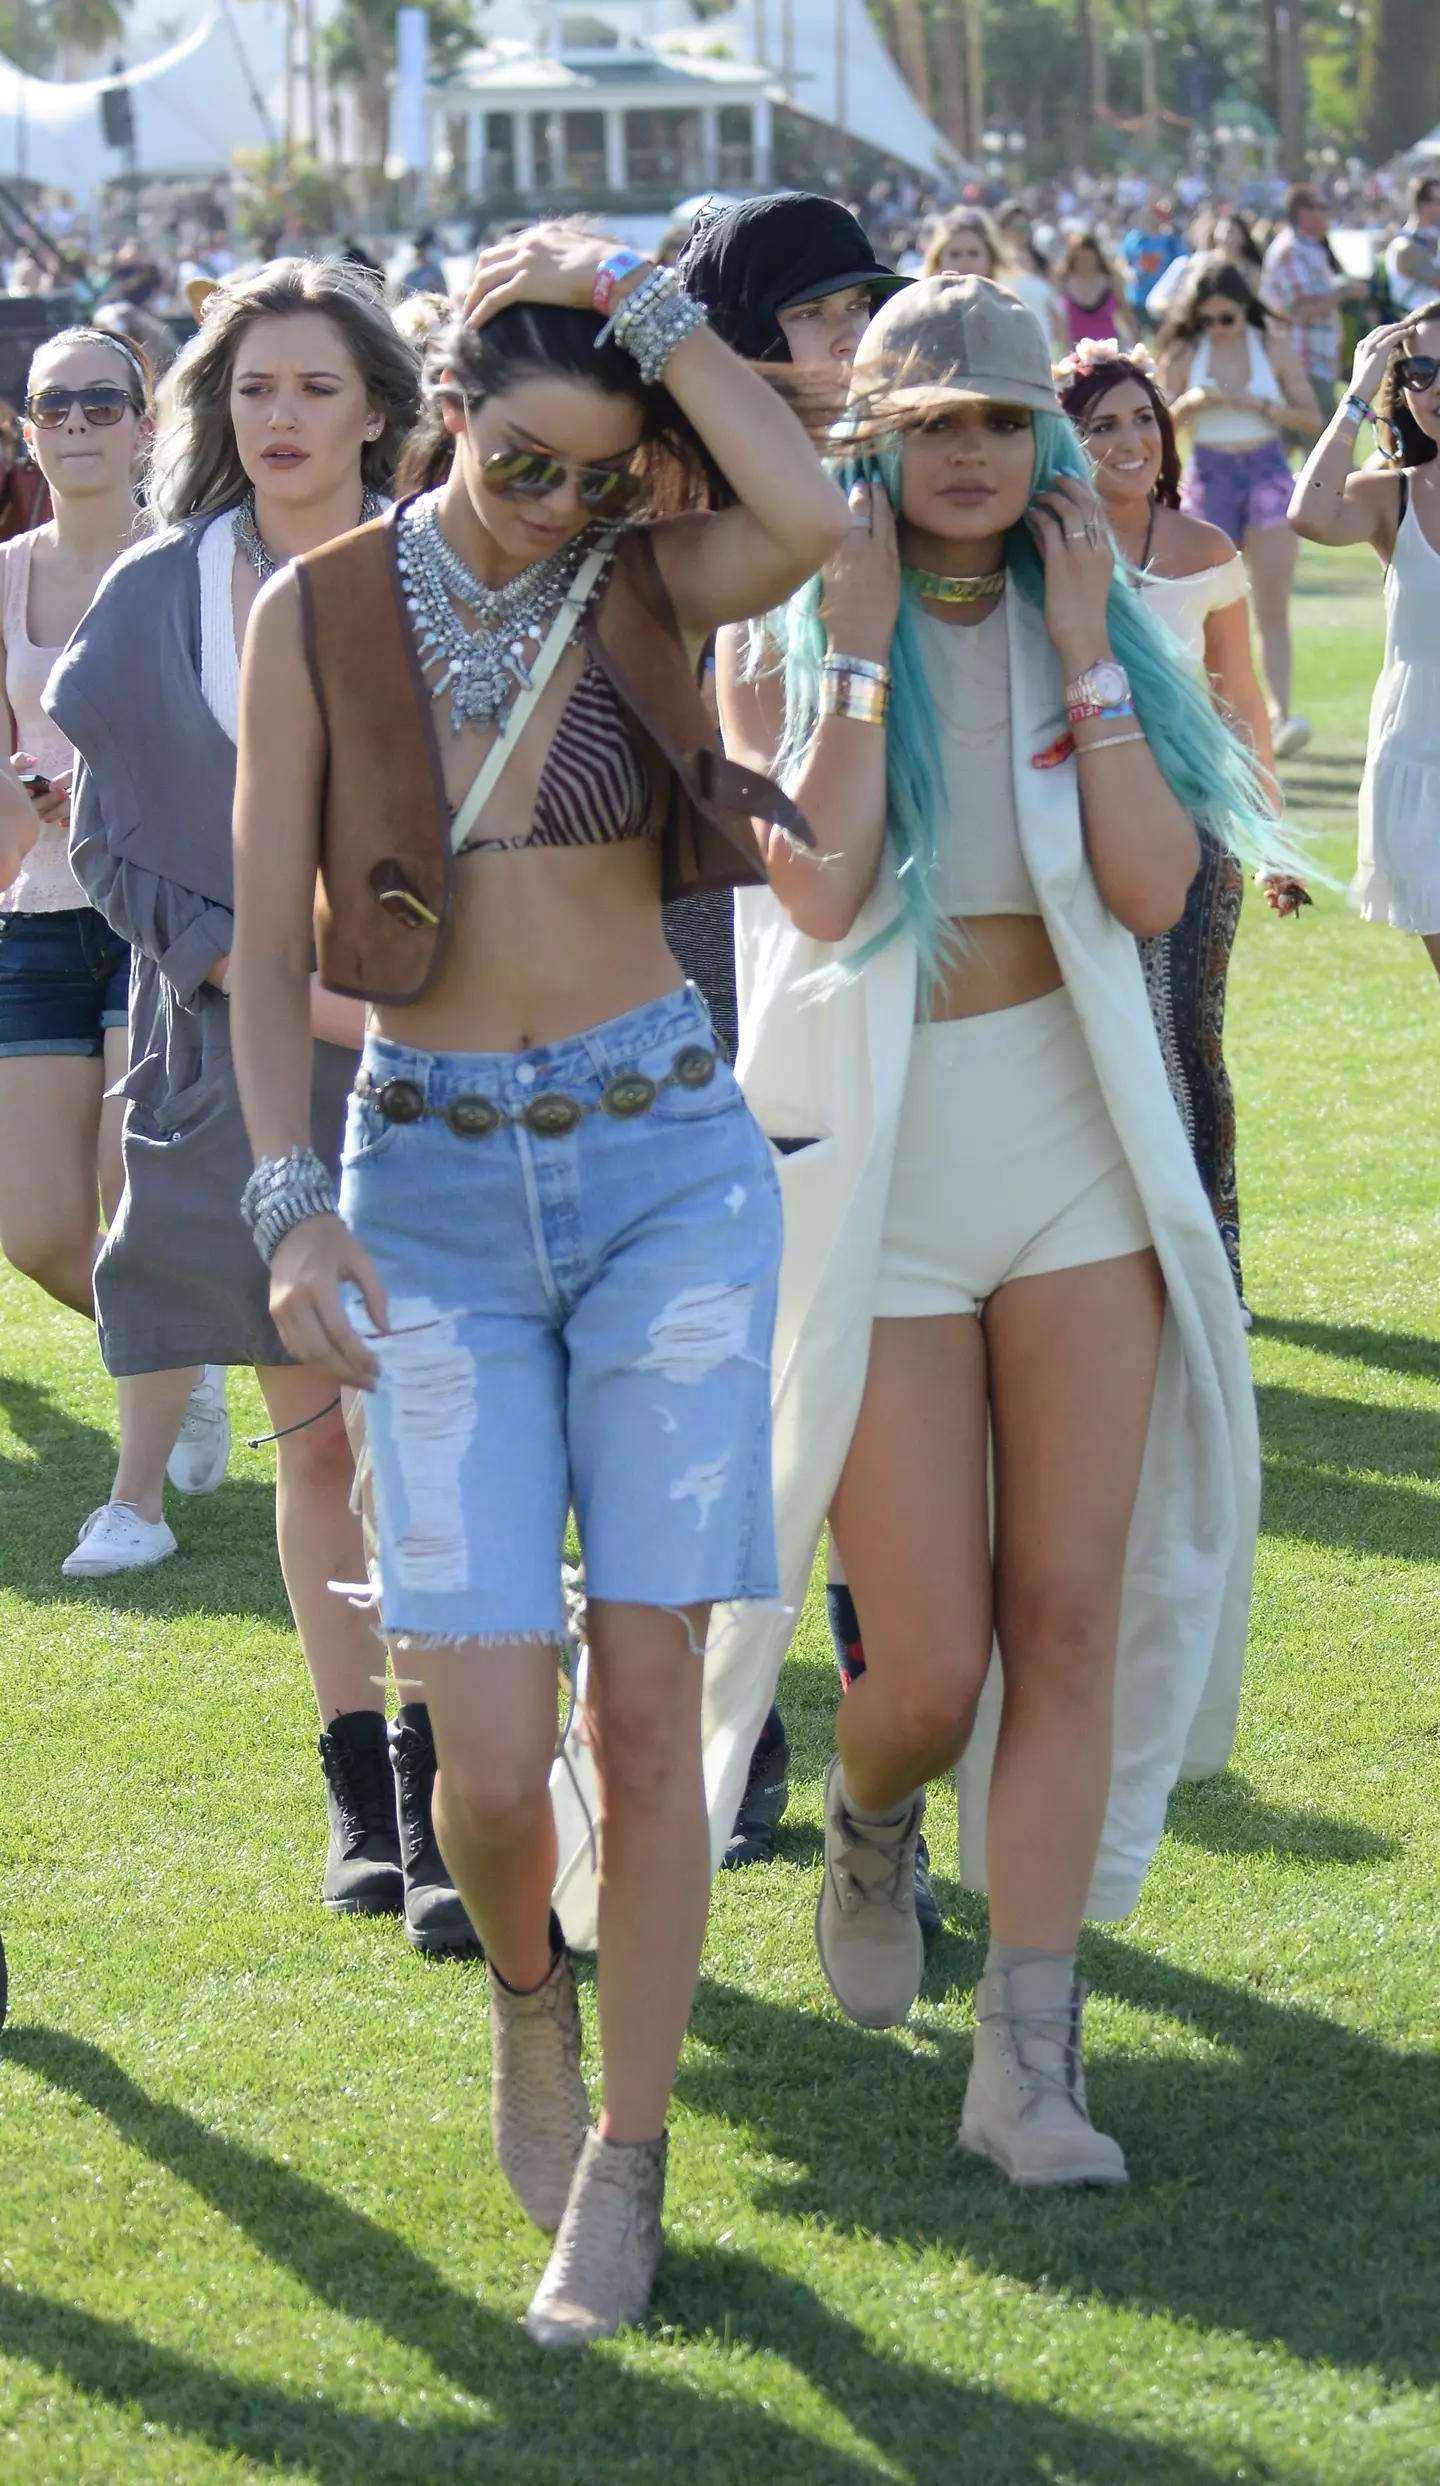 Kendall and Kylie Jenner attending Coachella in 2015. (Brigade/Bauer-Griffin/GC Images)